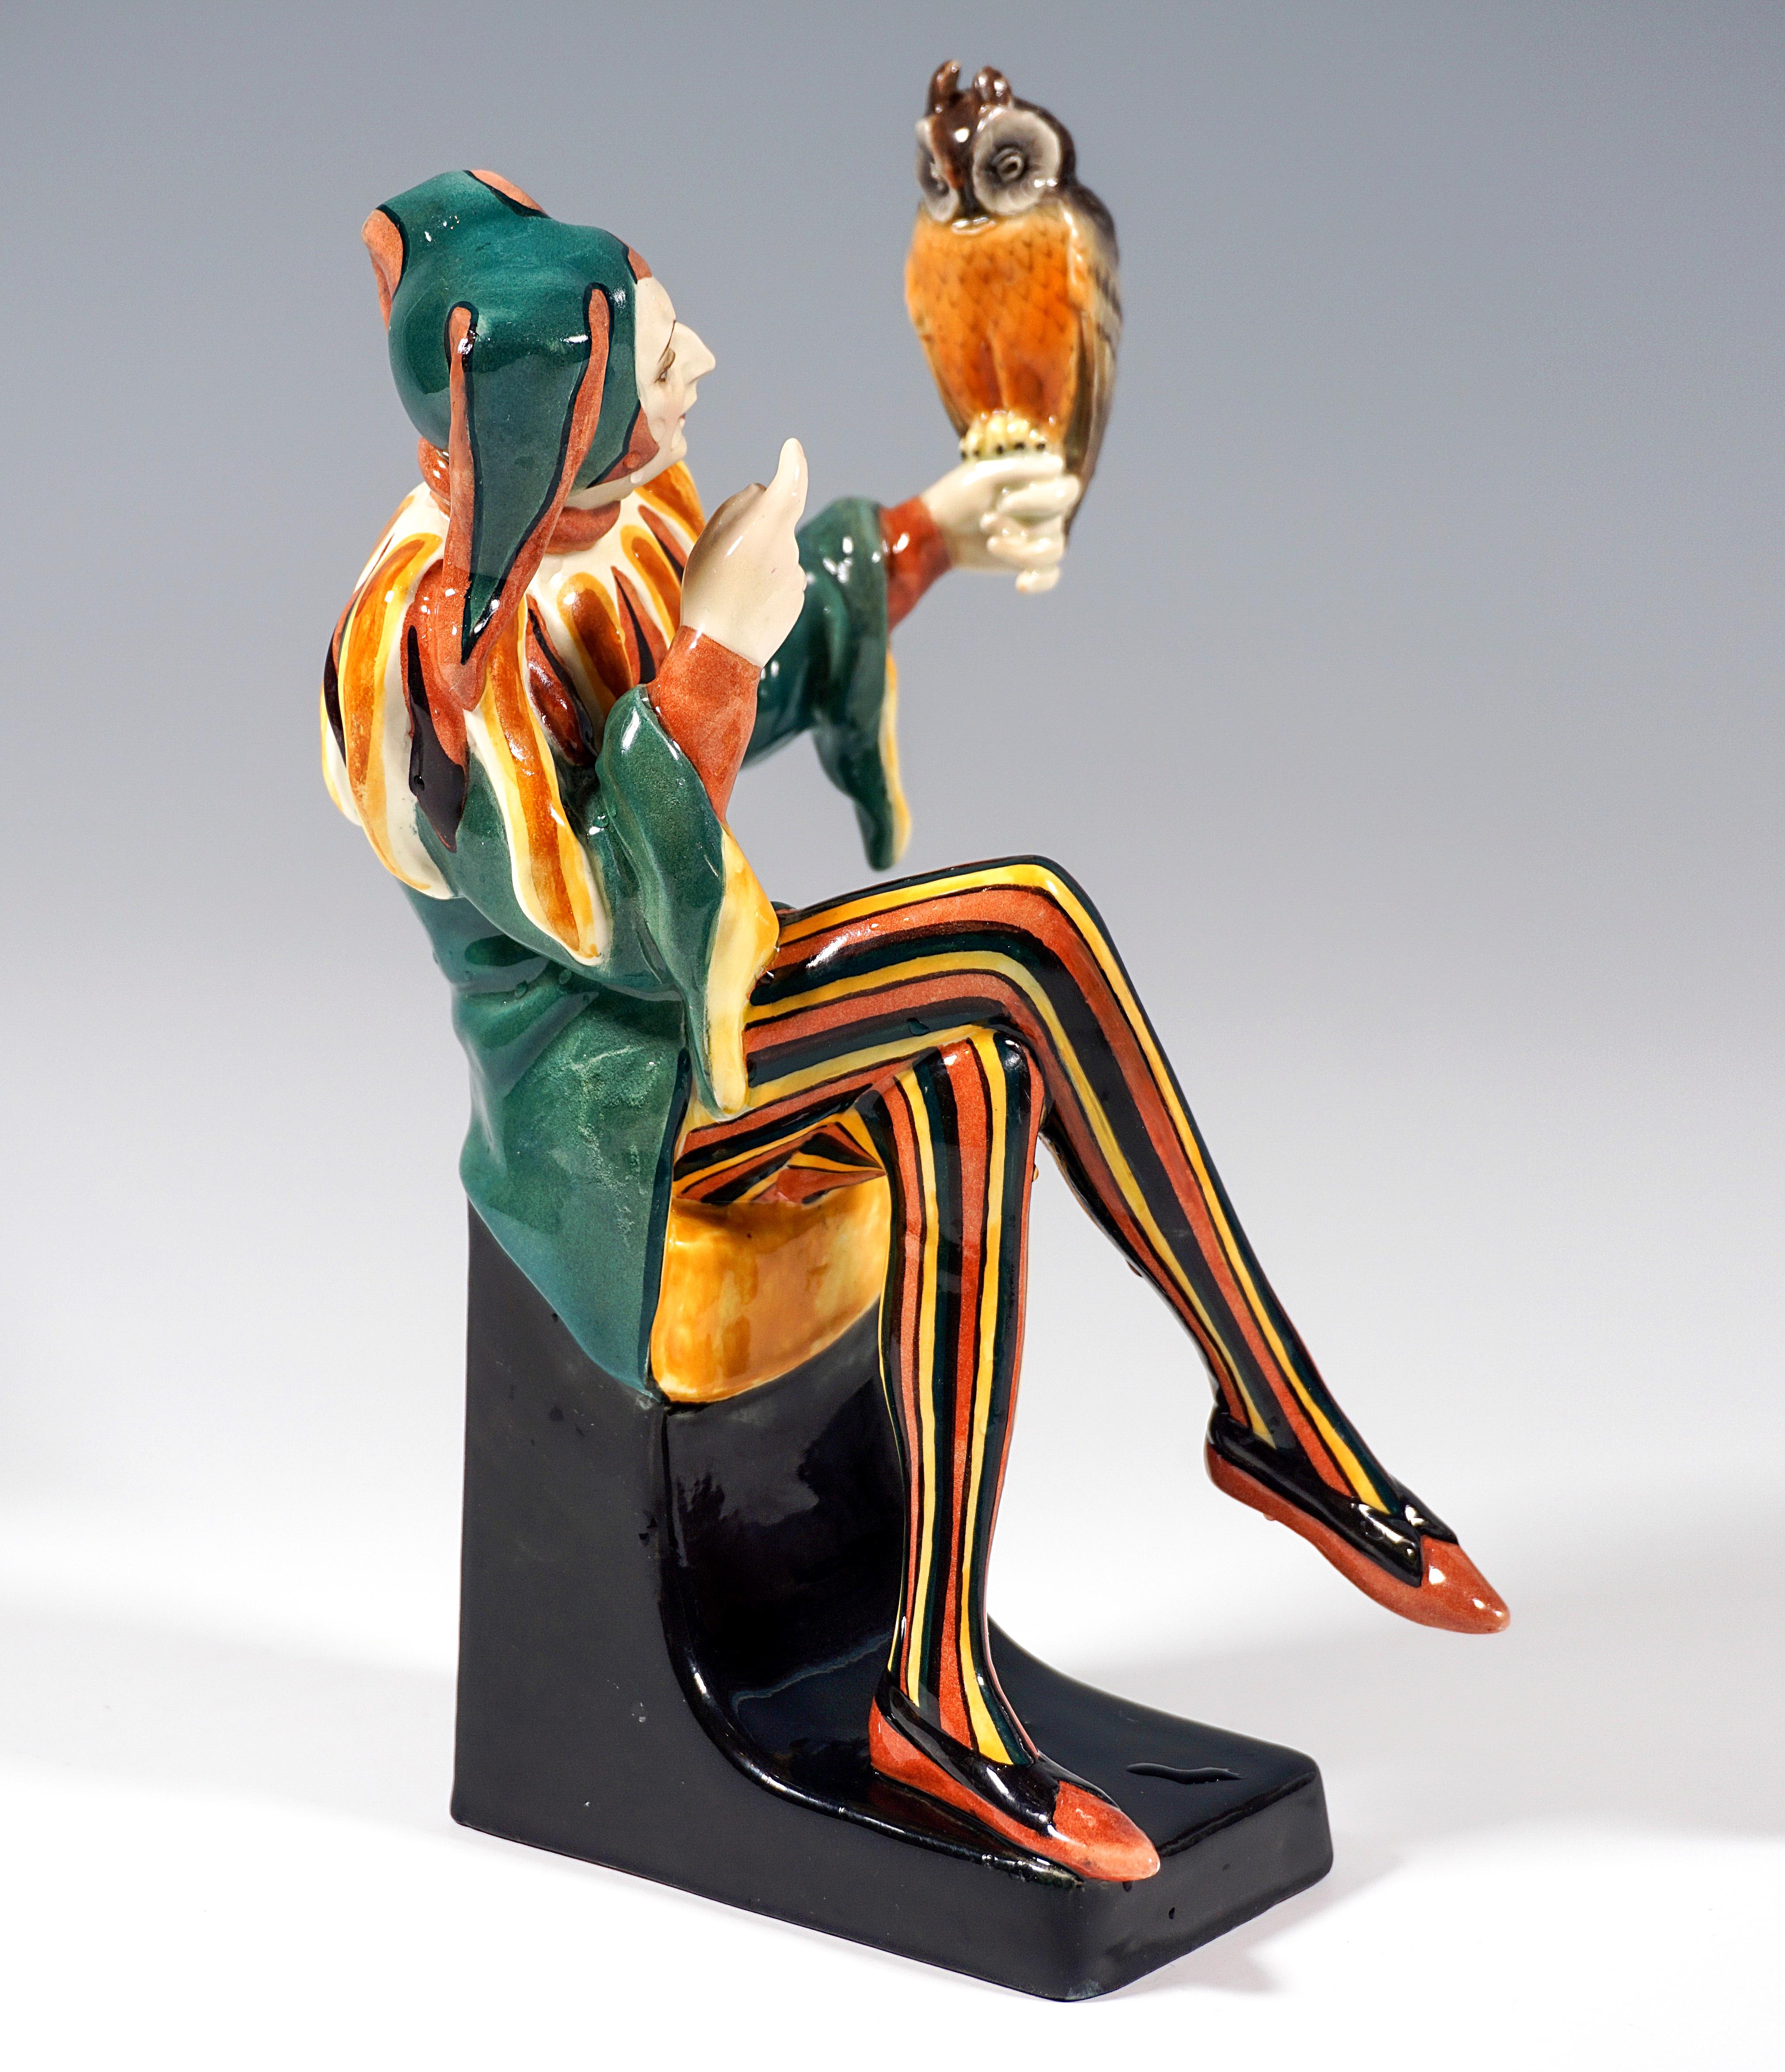 Exceptional Art Déco Goldscheider Figurine by Josef Lorenzl:
Man disguised as a jester with jester's cap, wide shirt and tight trousers seated on a black pedestal, on his left outstretched hand an owl, symbol of prudence and wisdom, reprimanding it